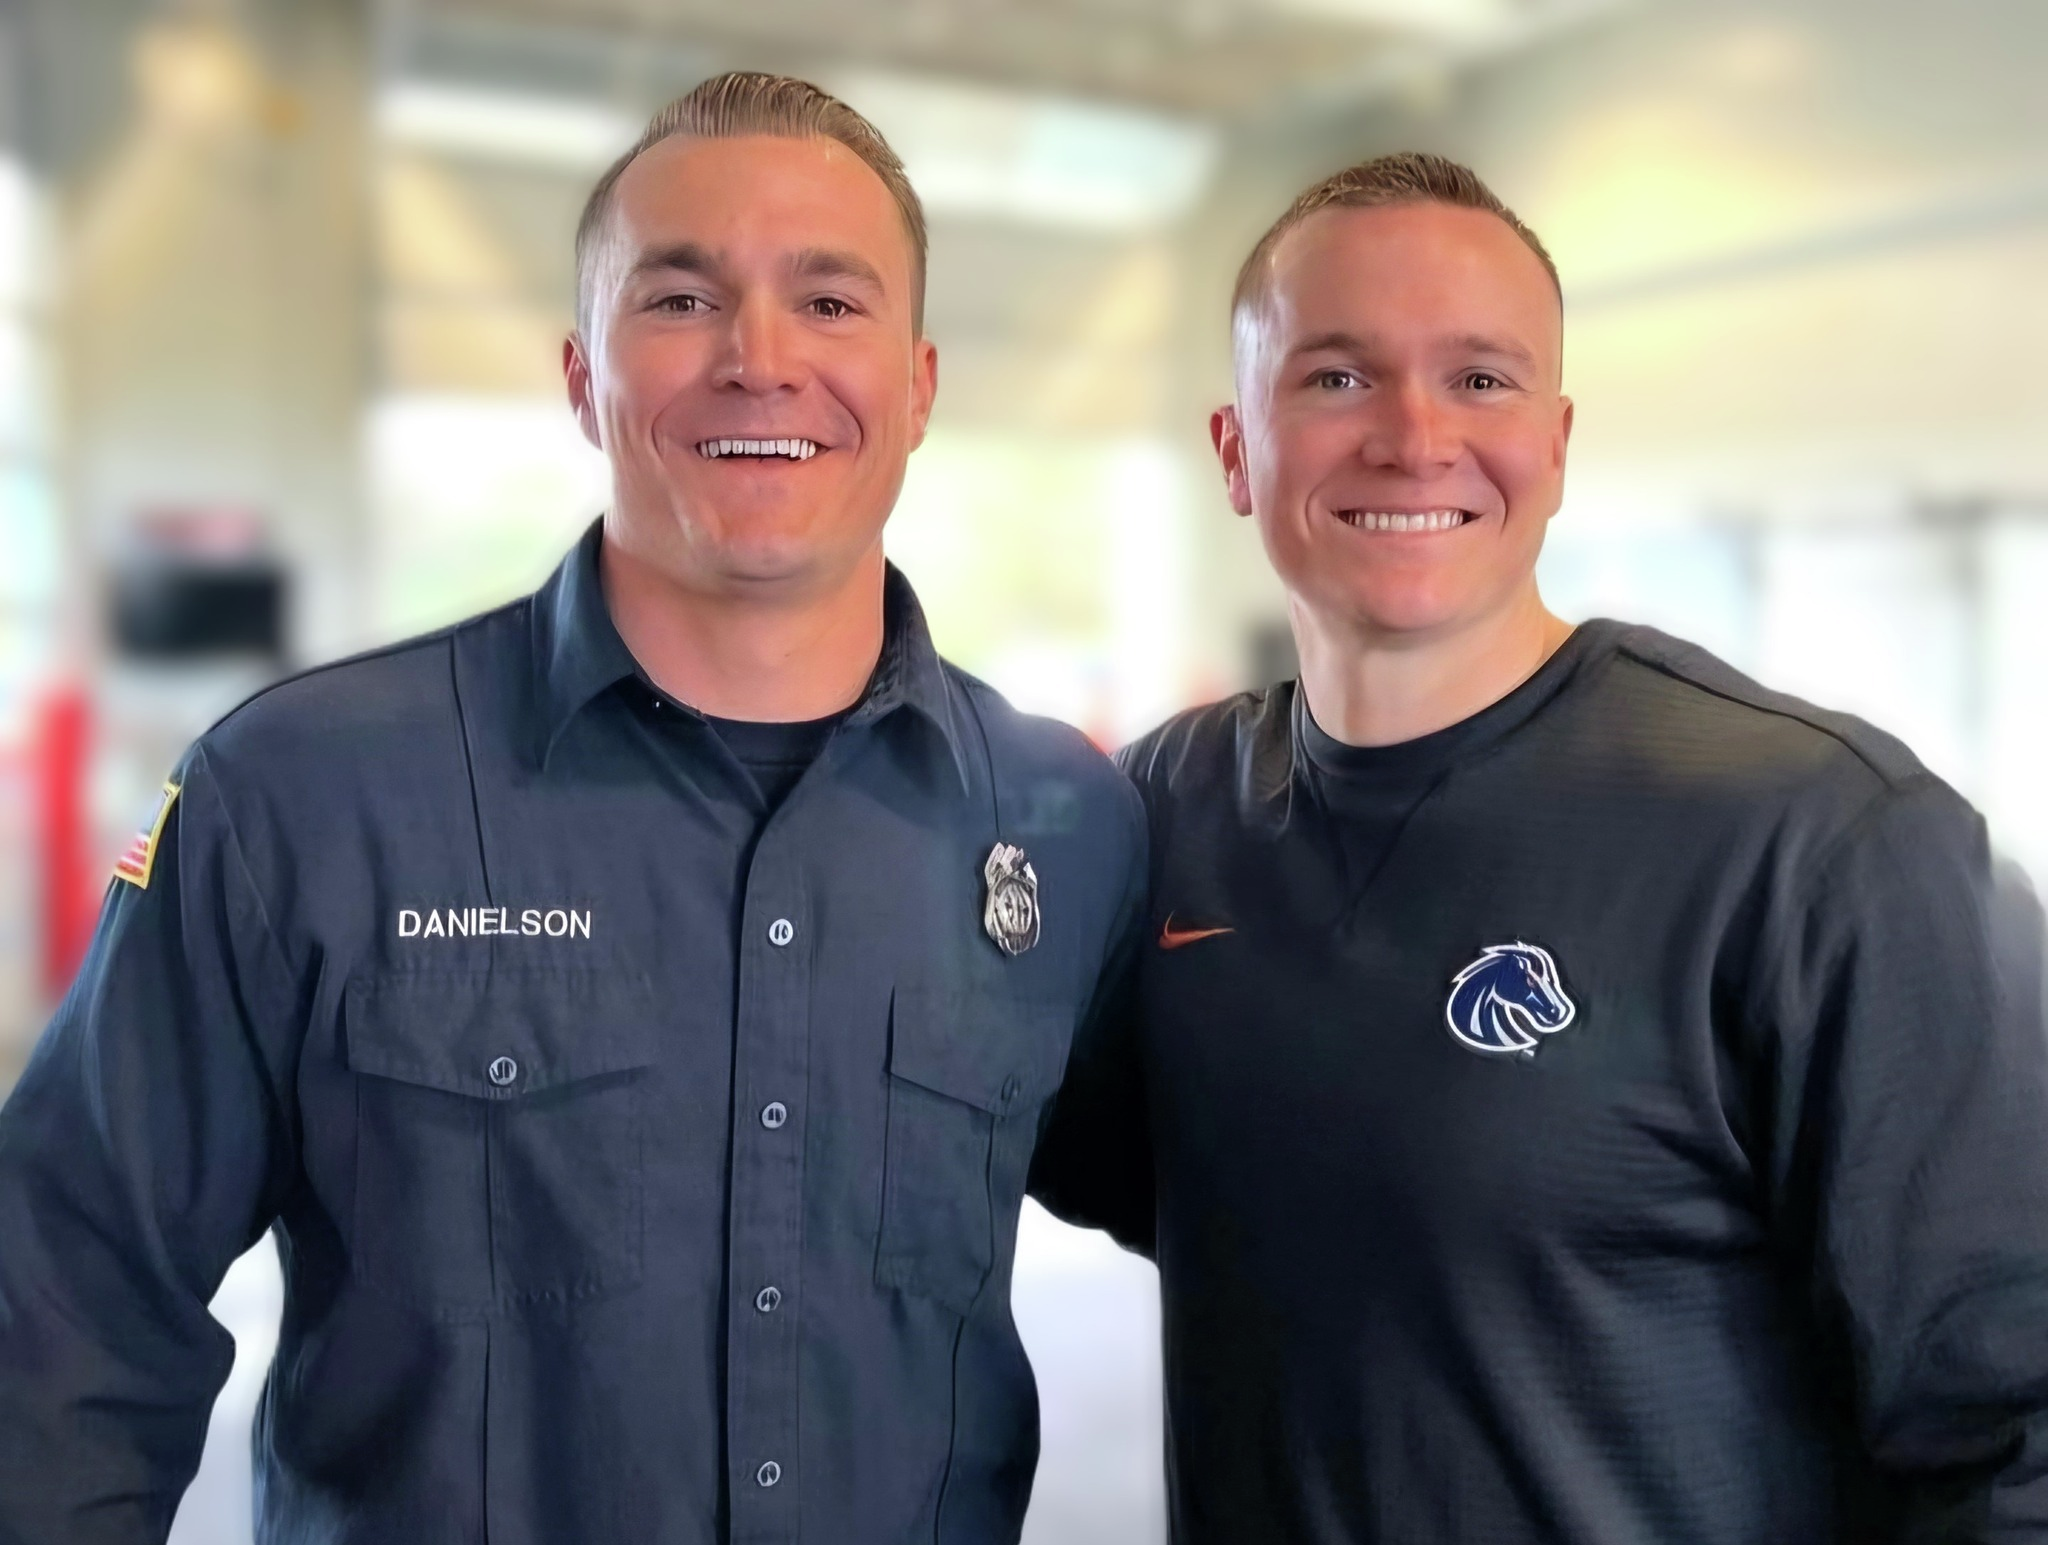 ETHAN DANIELSON: BOISE FIREMAN - AND STORIES ABOUT HIS FAMOUS BROTHER